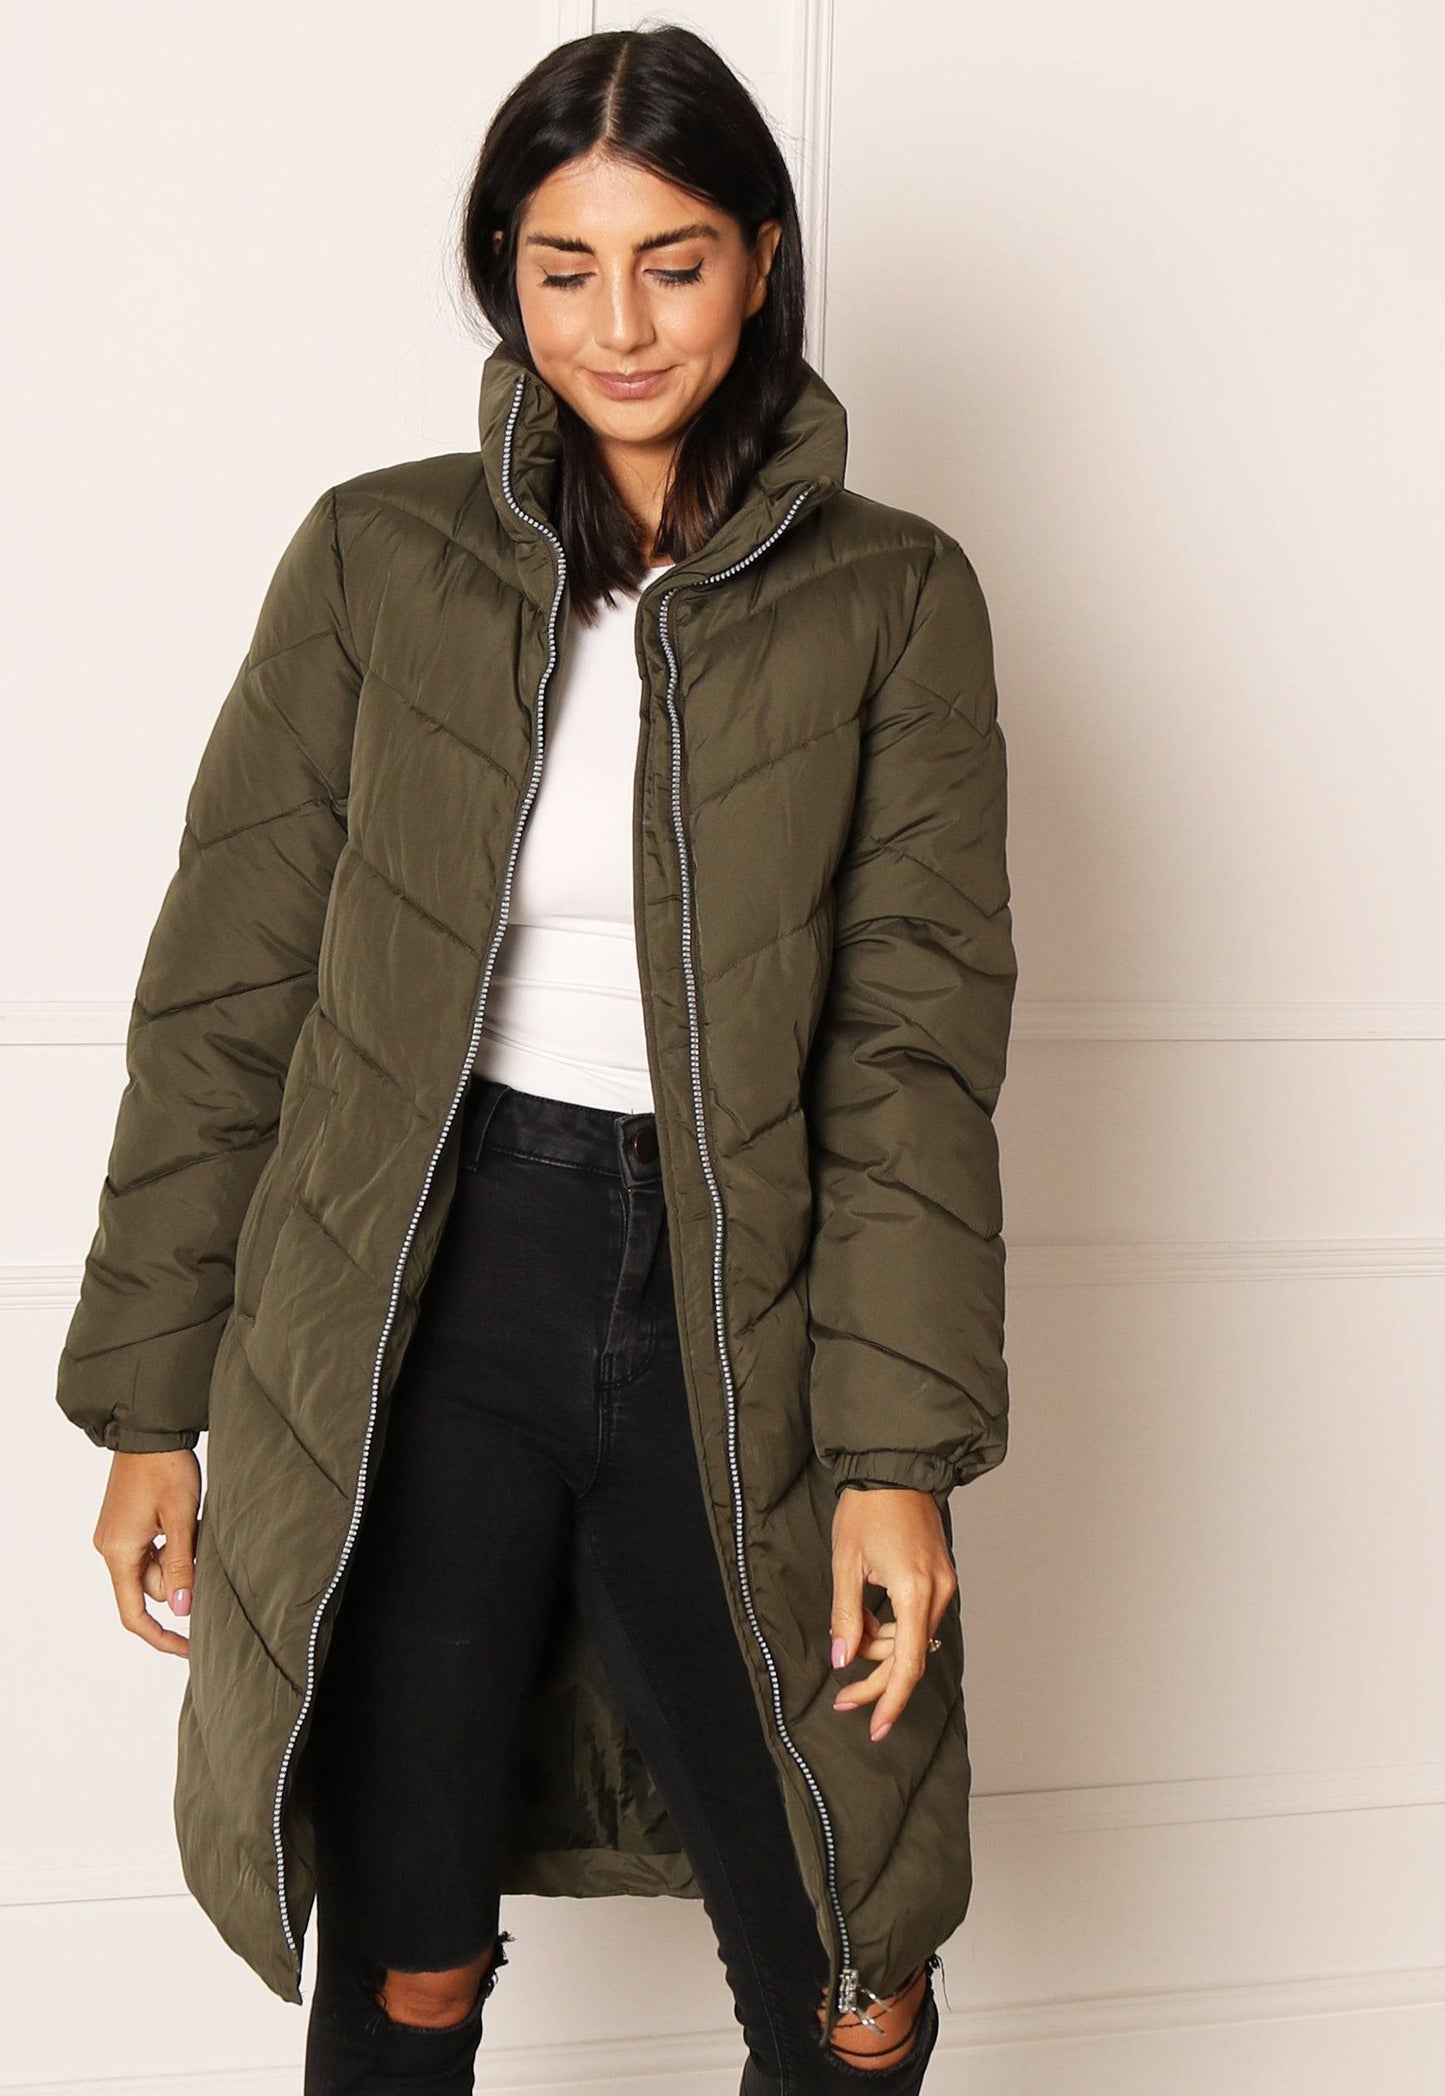 VILA Nilly Longline Midi Padded Puffer Coat with Funnel Neck in Tan  One  Nation Clothing VILA Nilly Longline Midi Padded Puffer Coat with Funnel  Neck in Tan